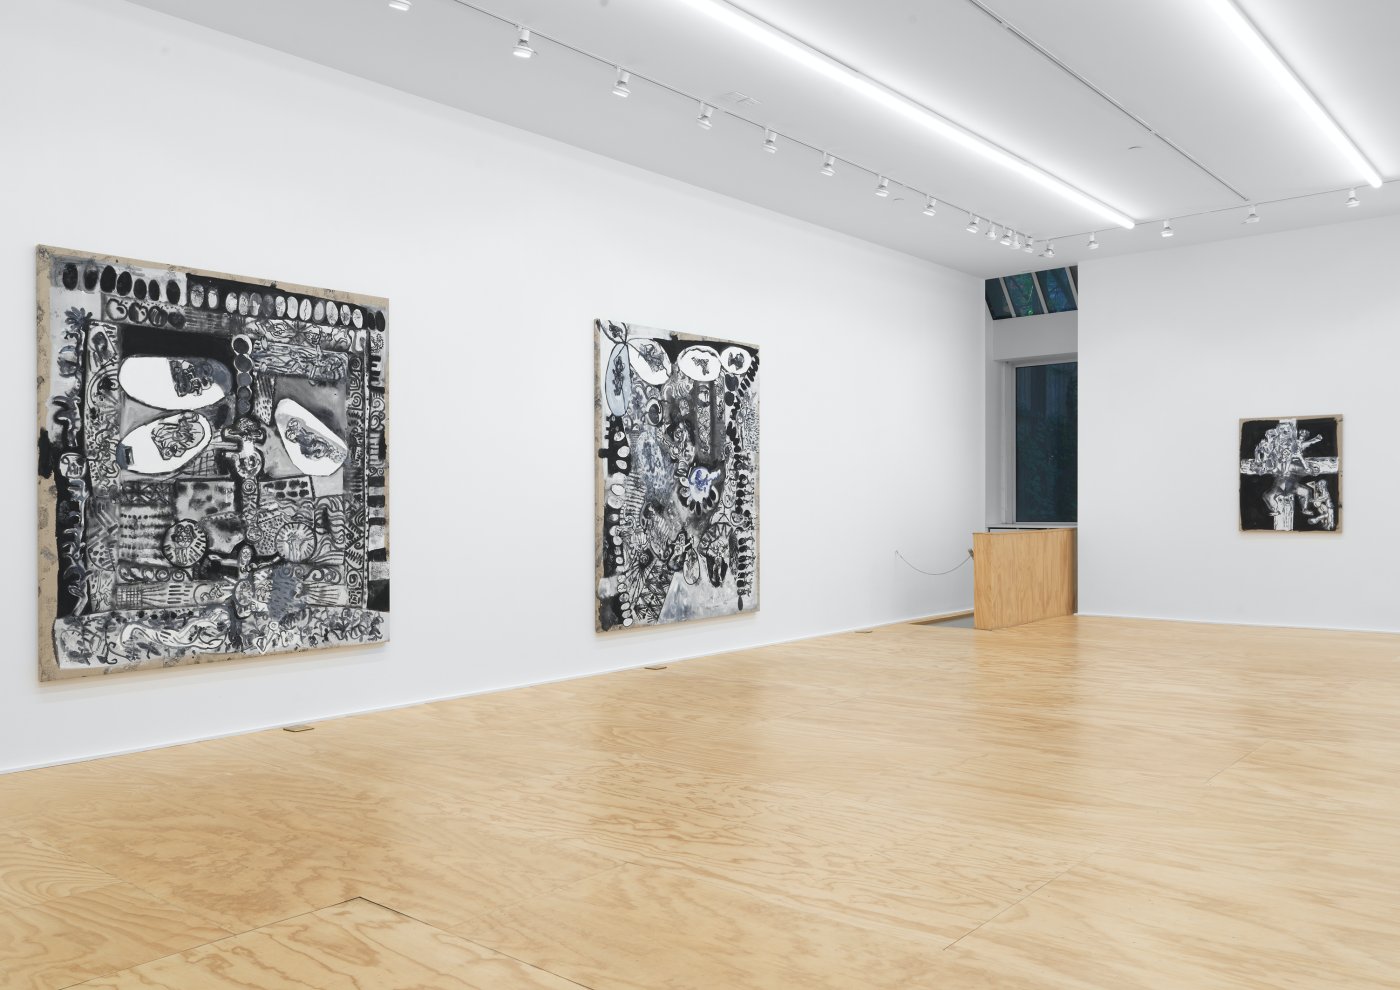 Installation image for Tobias Pils: 3 paintings 2 drawings 1 triptych, at Galerie Eva Presenhuber